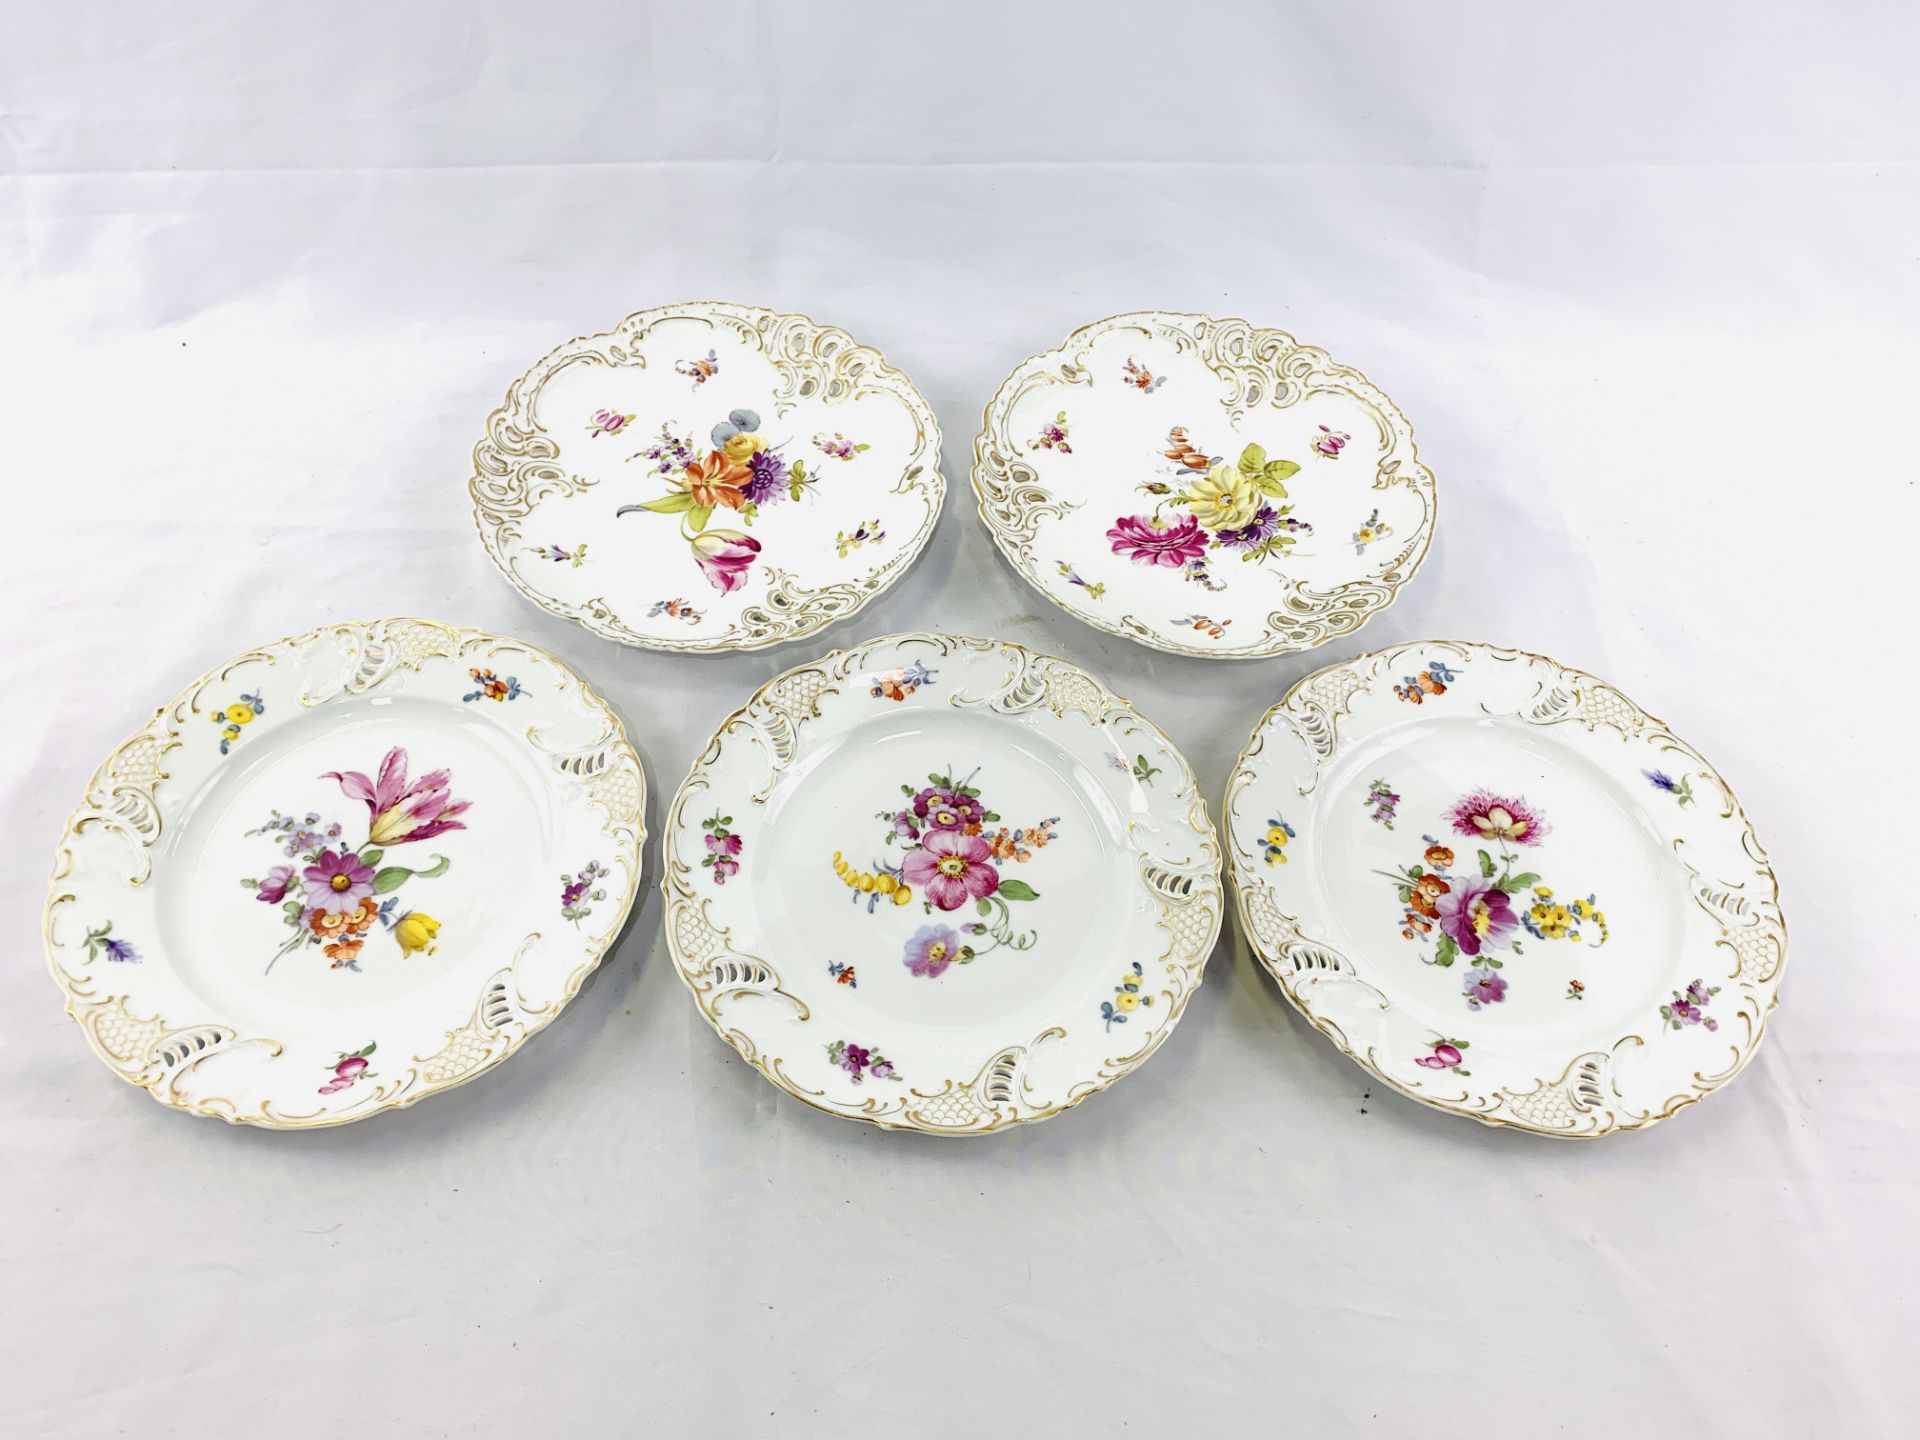 Nymphenburg porcelain and 2 other porcelain items